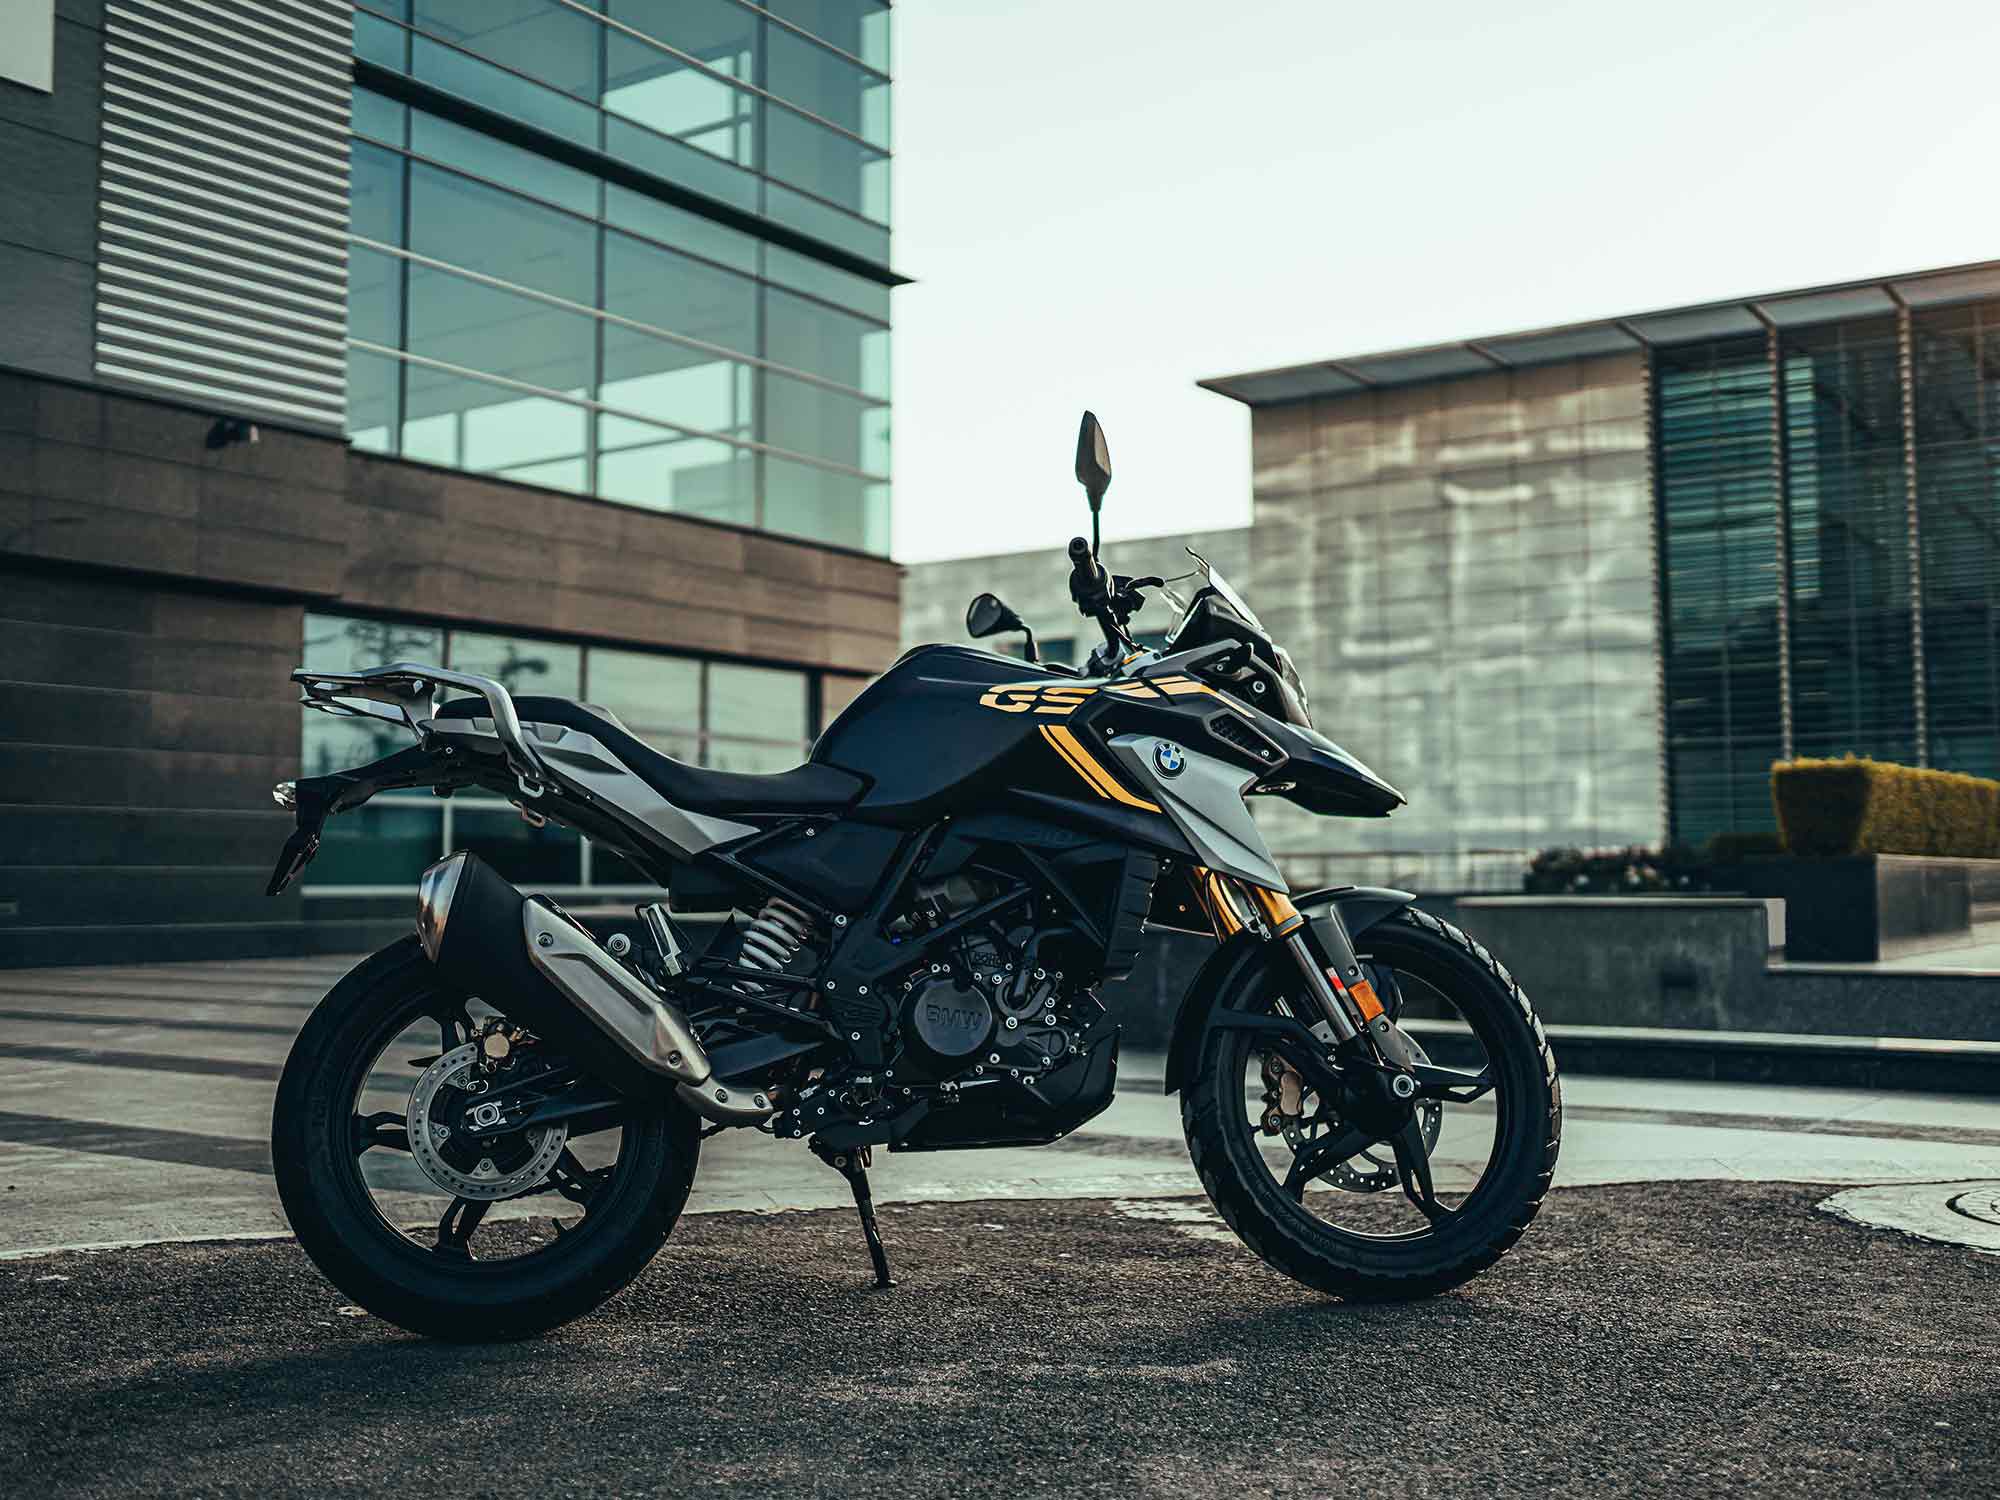 BMW style at an entry-level price—the G 310 GS.